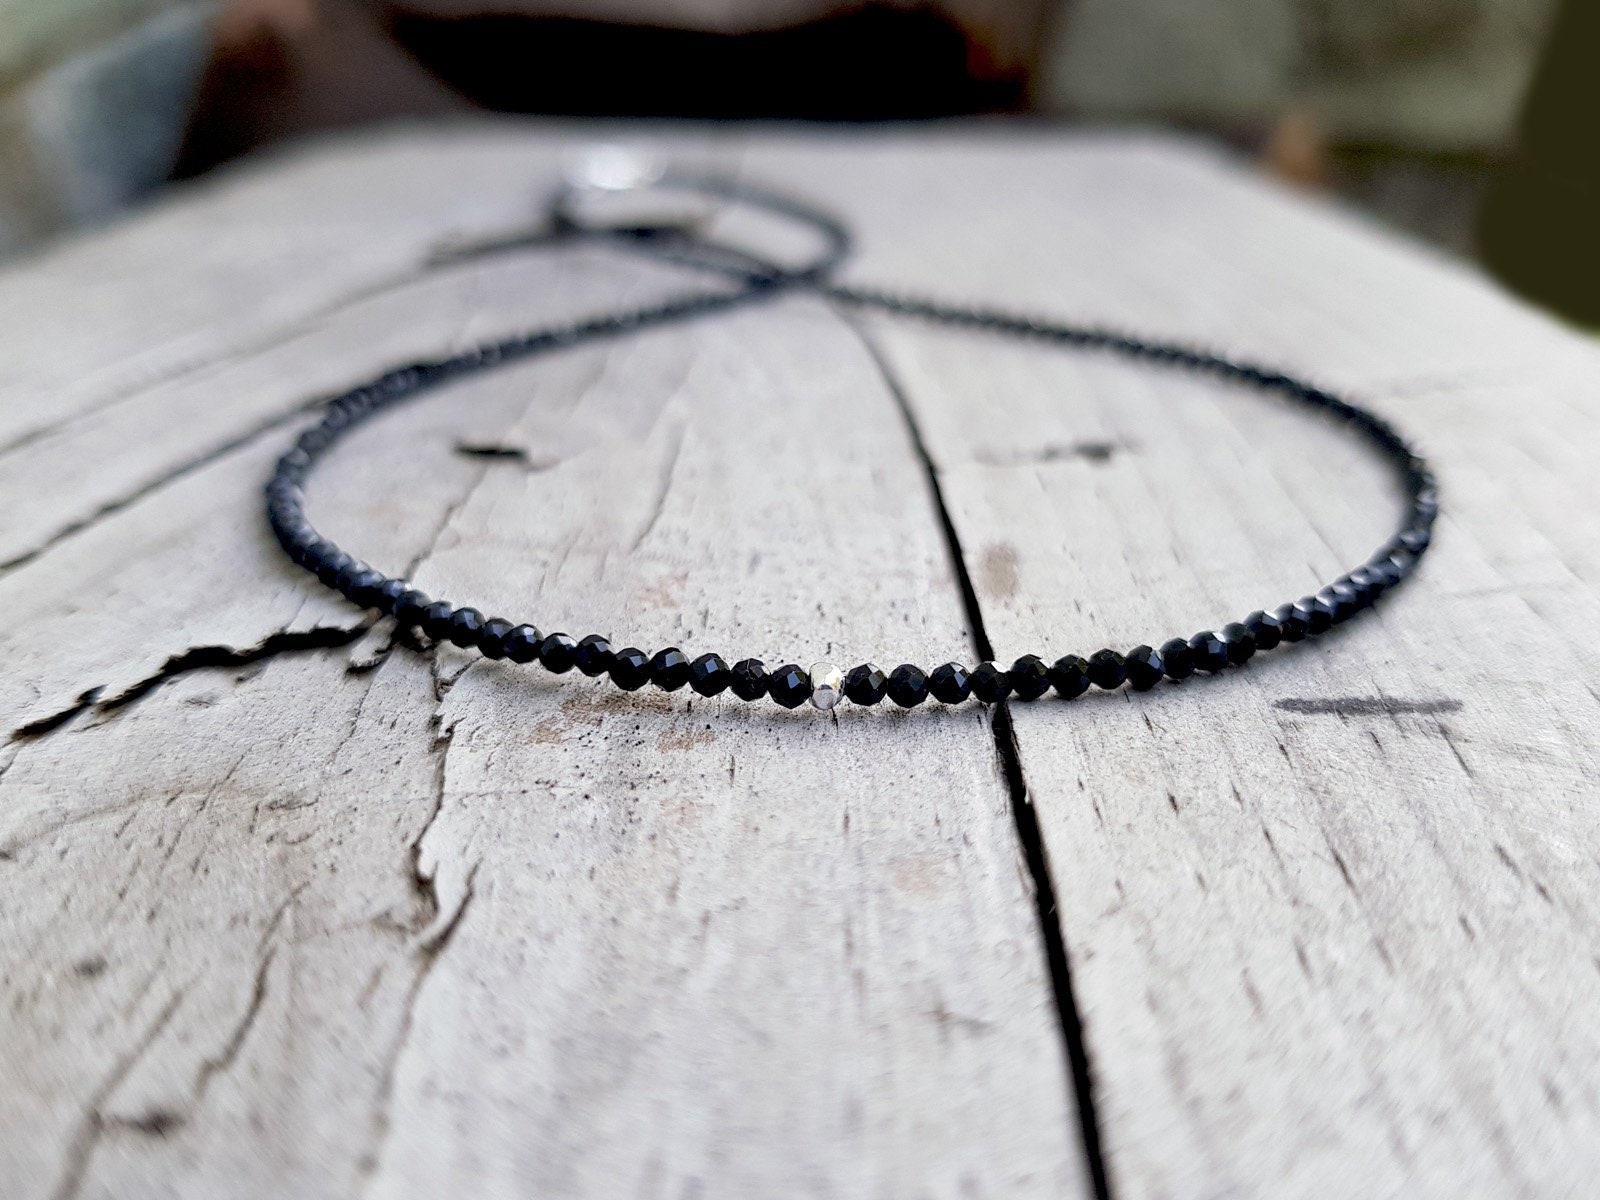 Black onyx stones necklace for men and pure silver nuggets - JoyElly